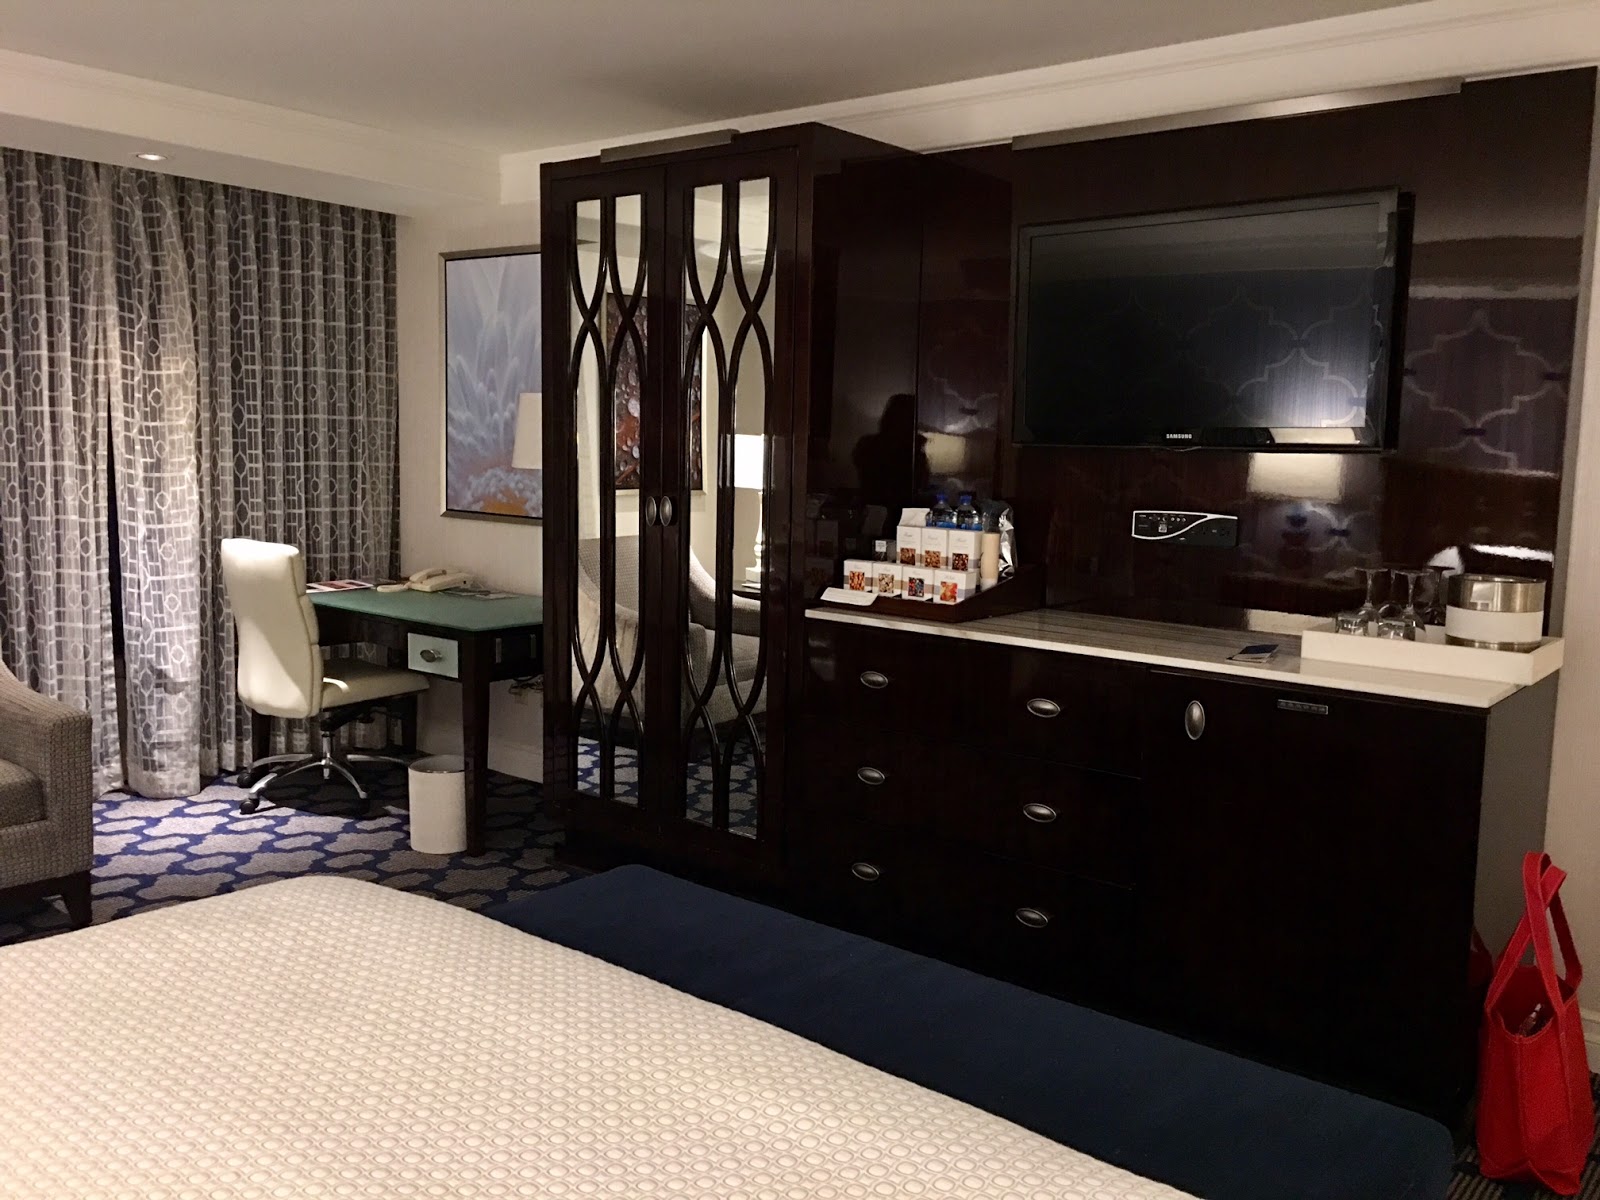 Bellagio Hotel Room Review